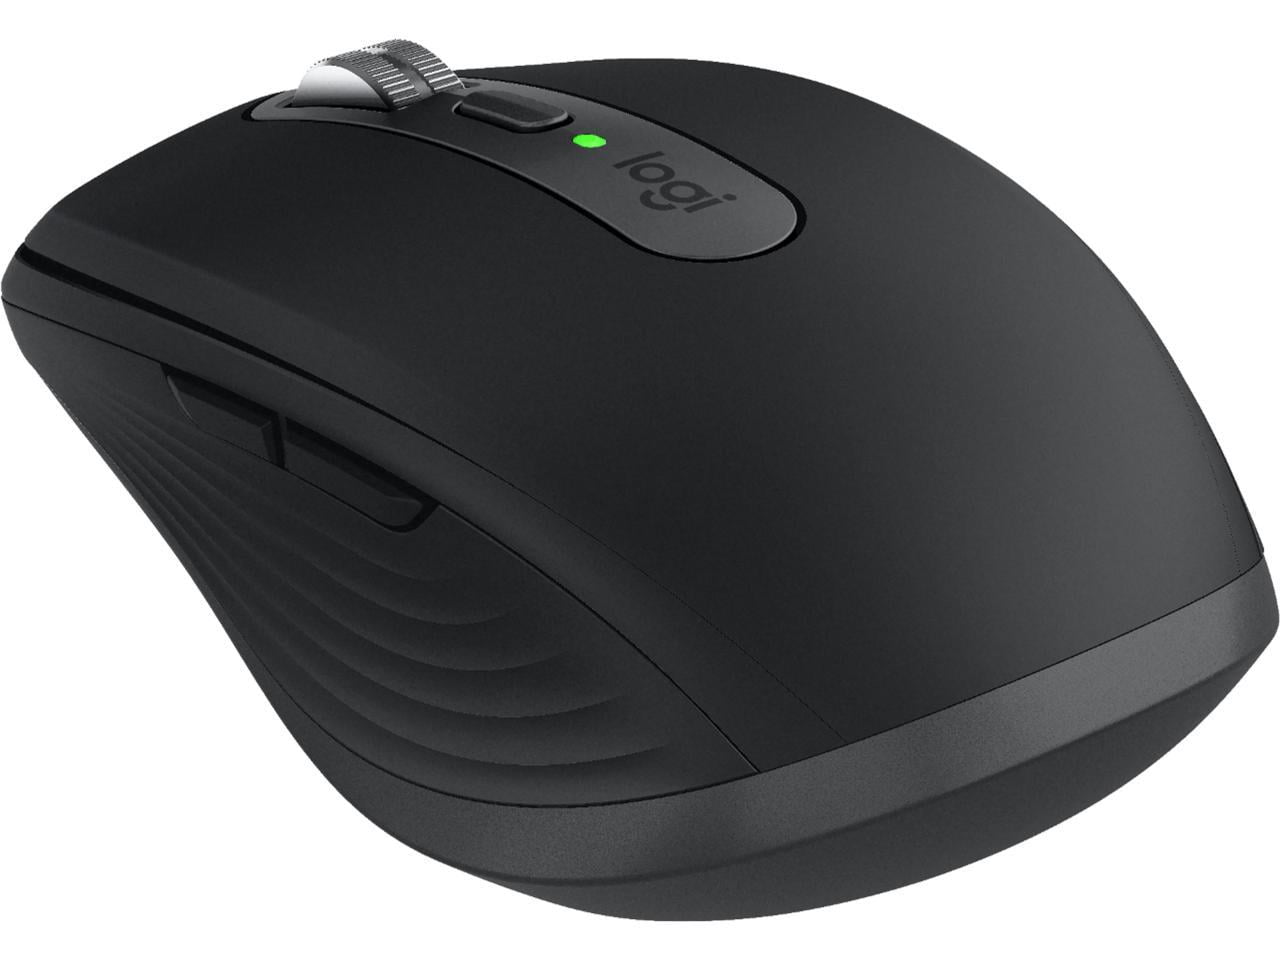 Logitech MX Anywhere 3 Compact Performance Mouse, Wireless, Fast Scrolling, Any Surface, Portable, 4000DPI, Customizable Buttons, USB-C, Bluetooth - Black Walmart.com